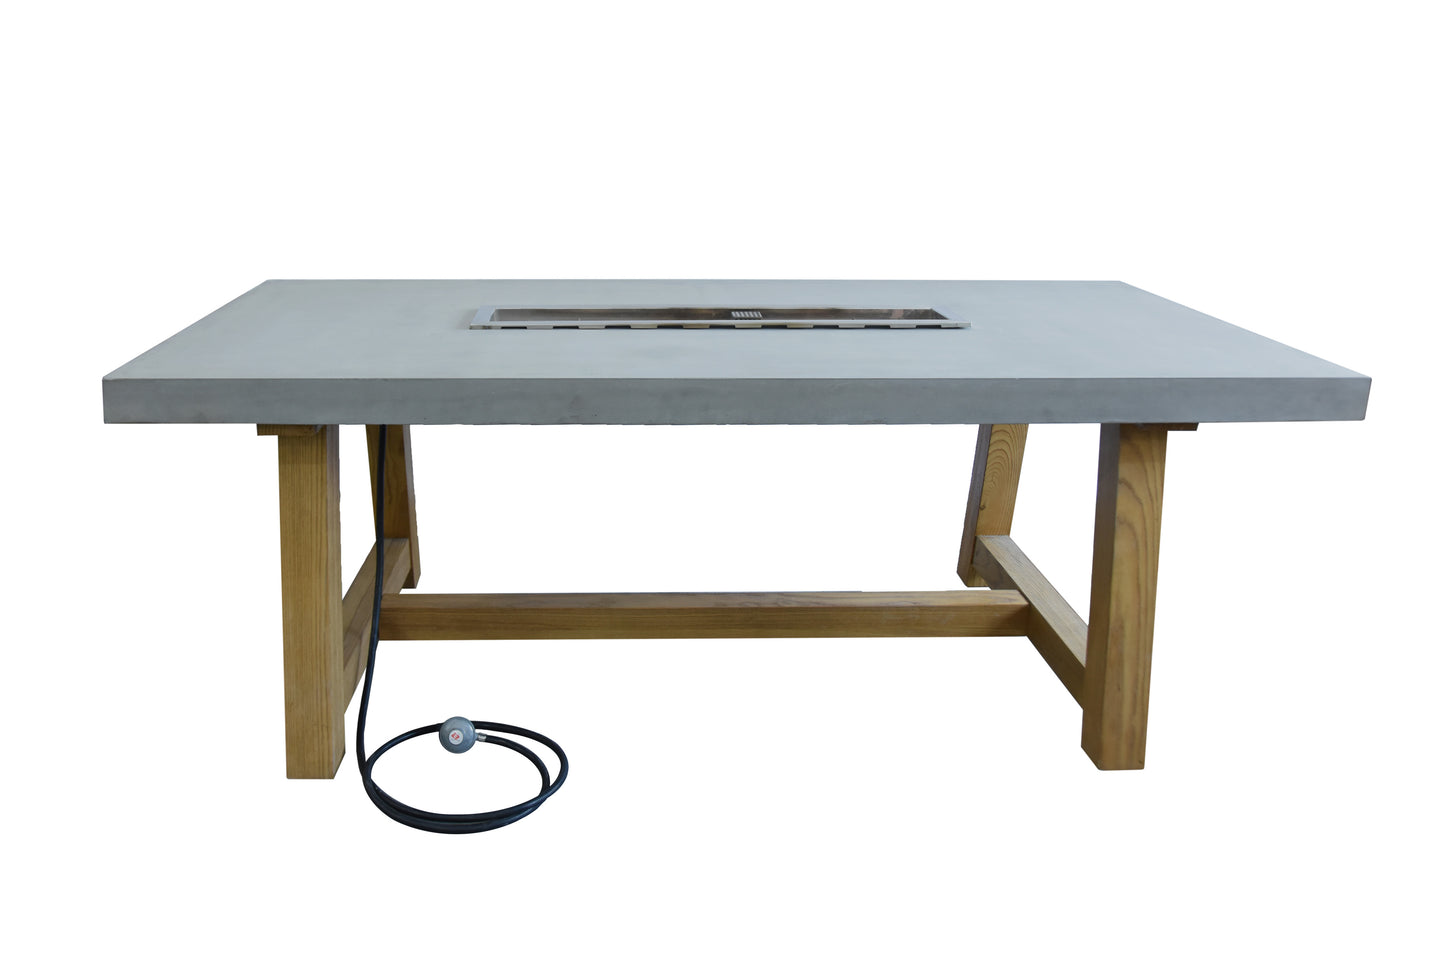 Sonoma 6 Seater Dining Table Concrete Fire Pit